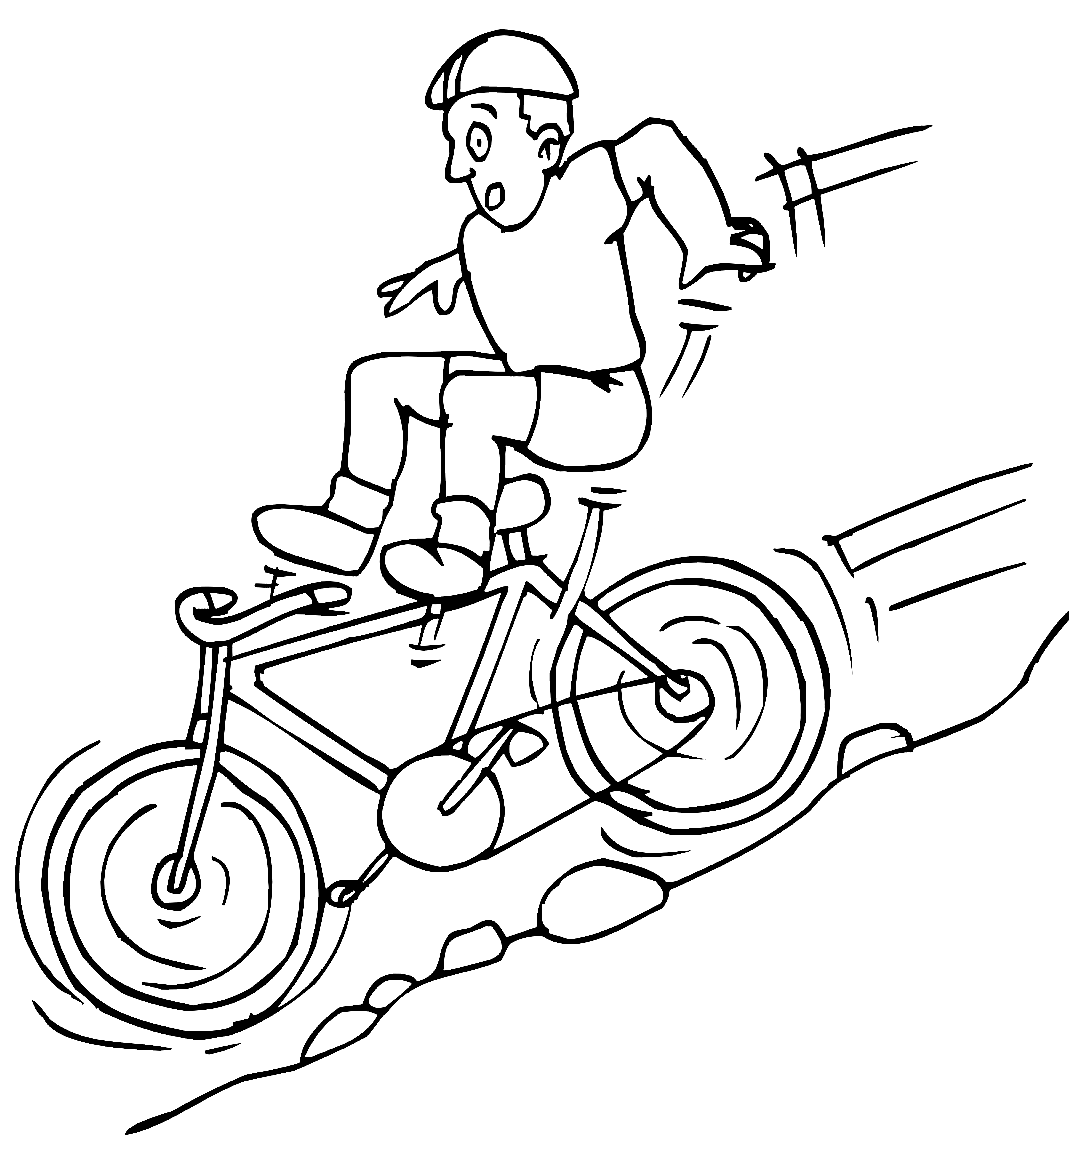 Downhill on Mountain Bike Coloring Page